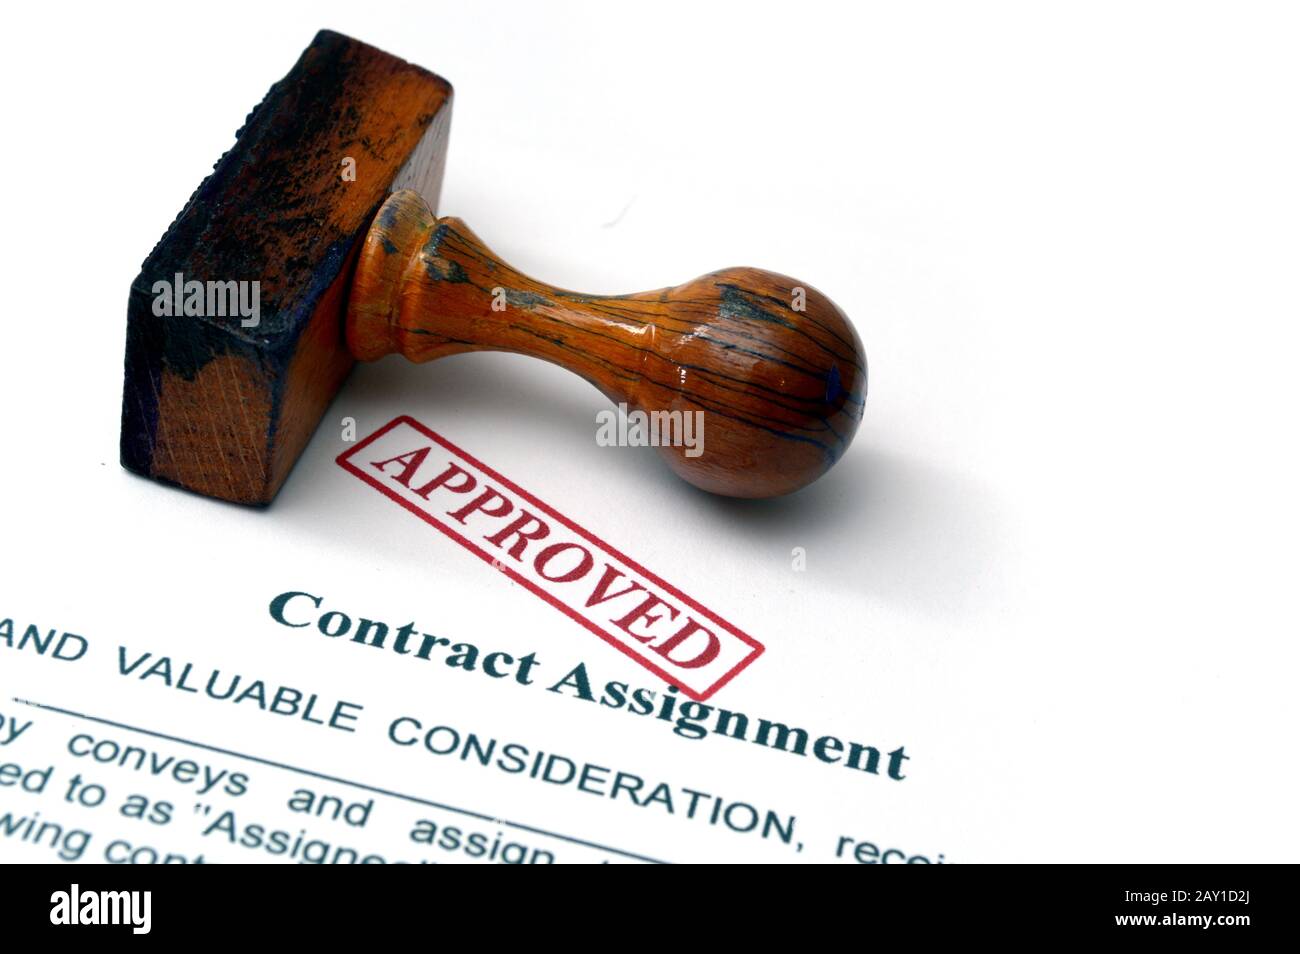 Contract assignment Stock Photo